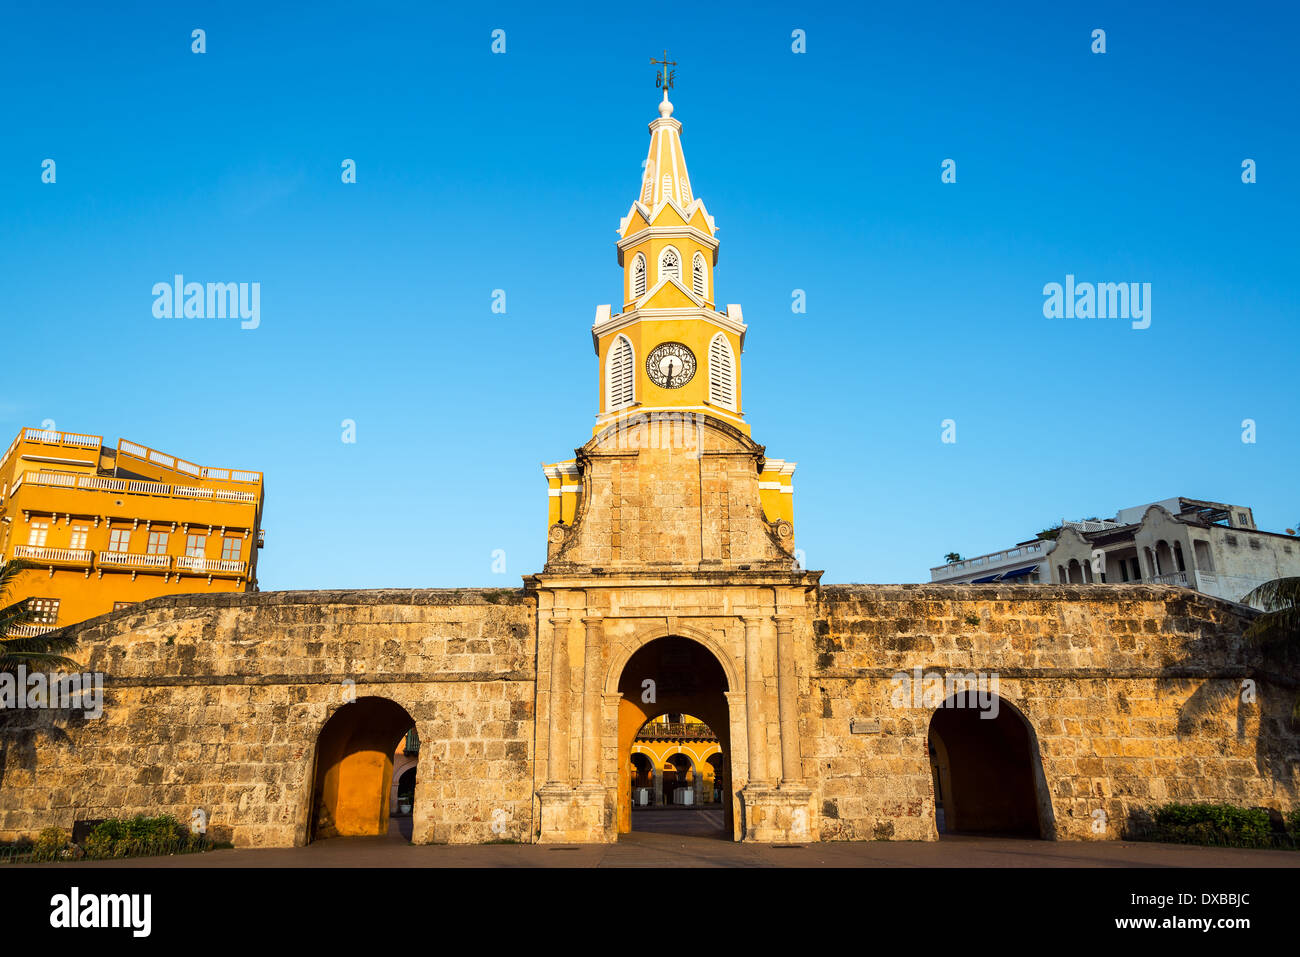 The historic clock tower gate is the main entrance into the old city of Cartagena, Colombia Stock Photo